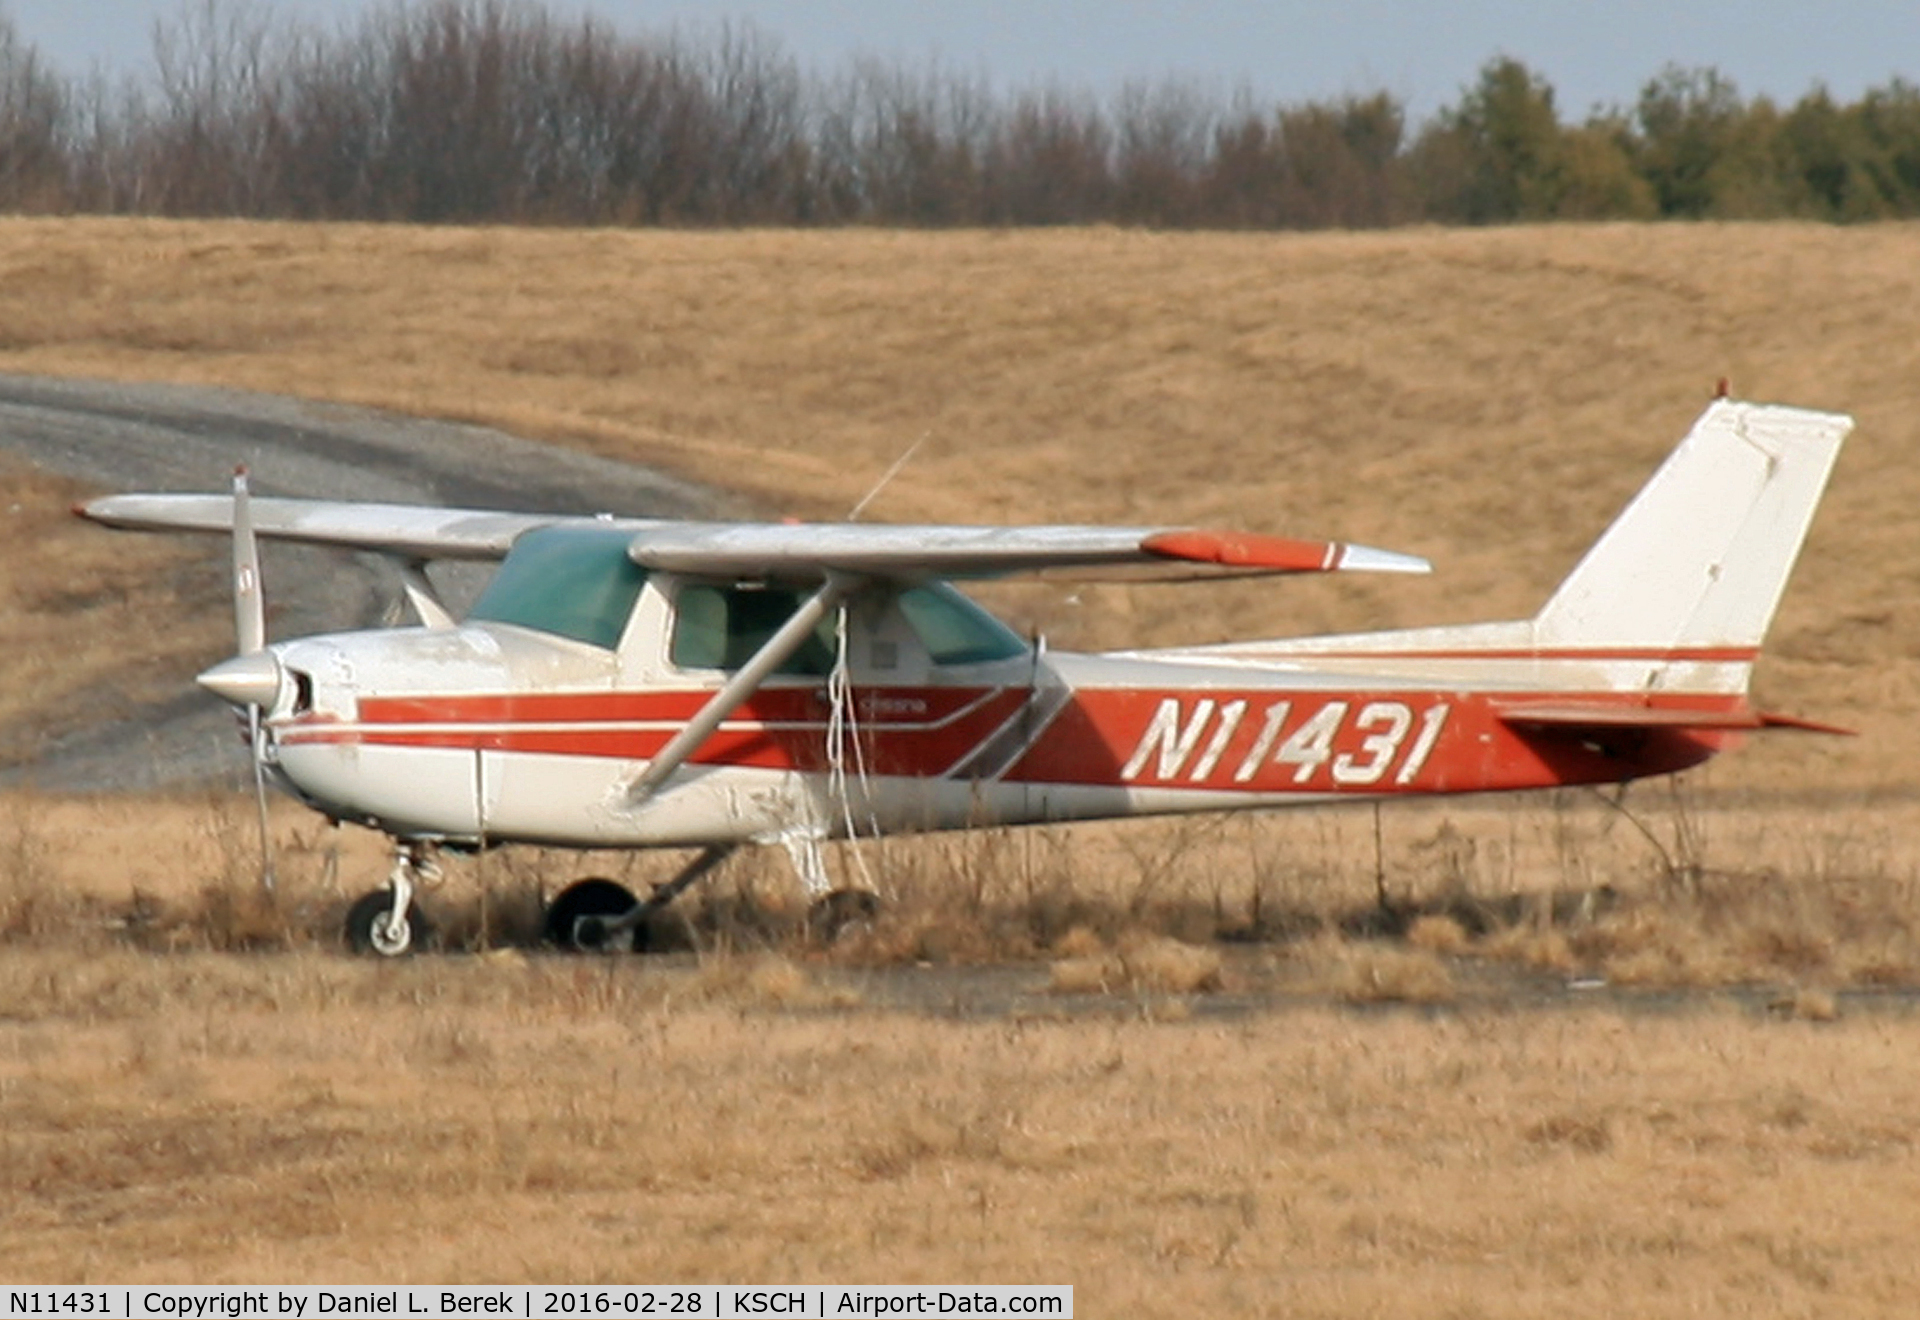 N11431, 1973 Cessna 150L C/N 15075415, Sitting out in a remote corner of the airfield, this Cessna appears not to have flown for a while.